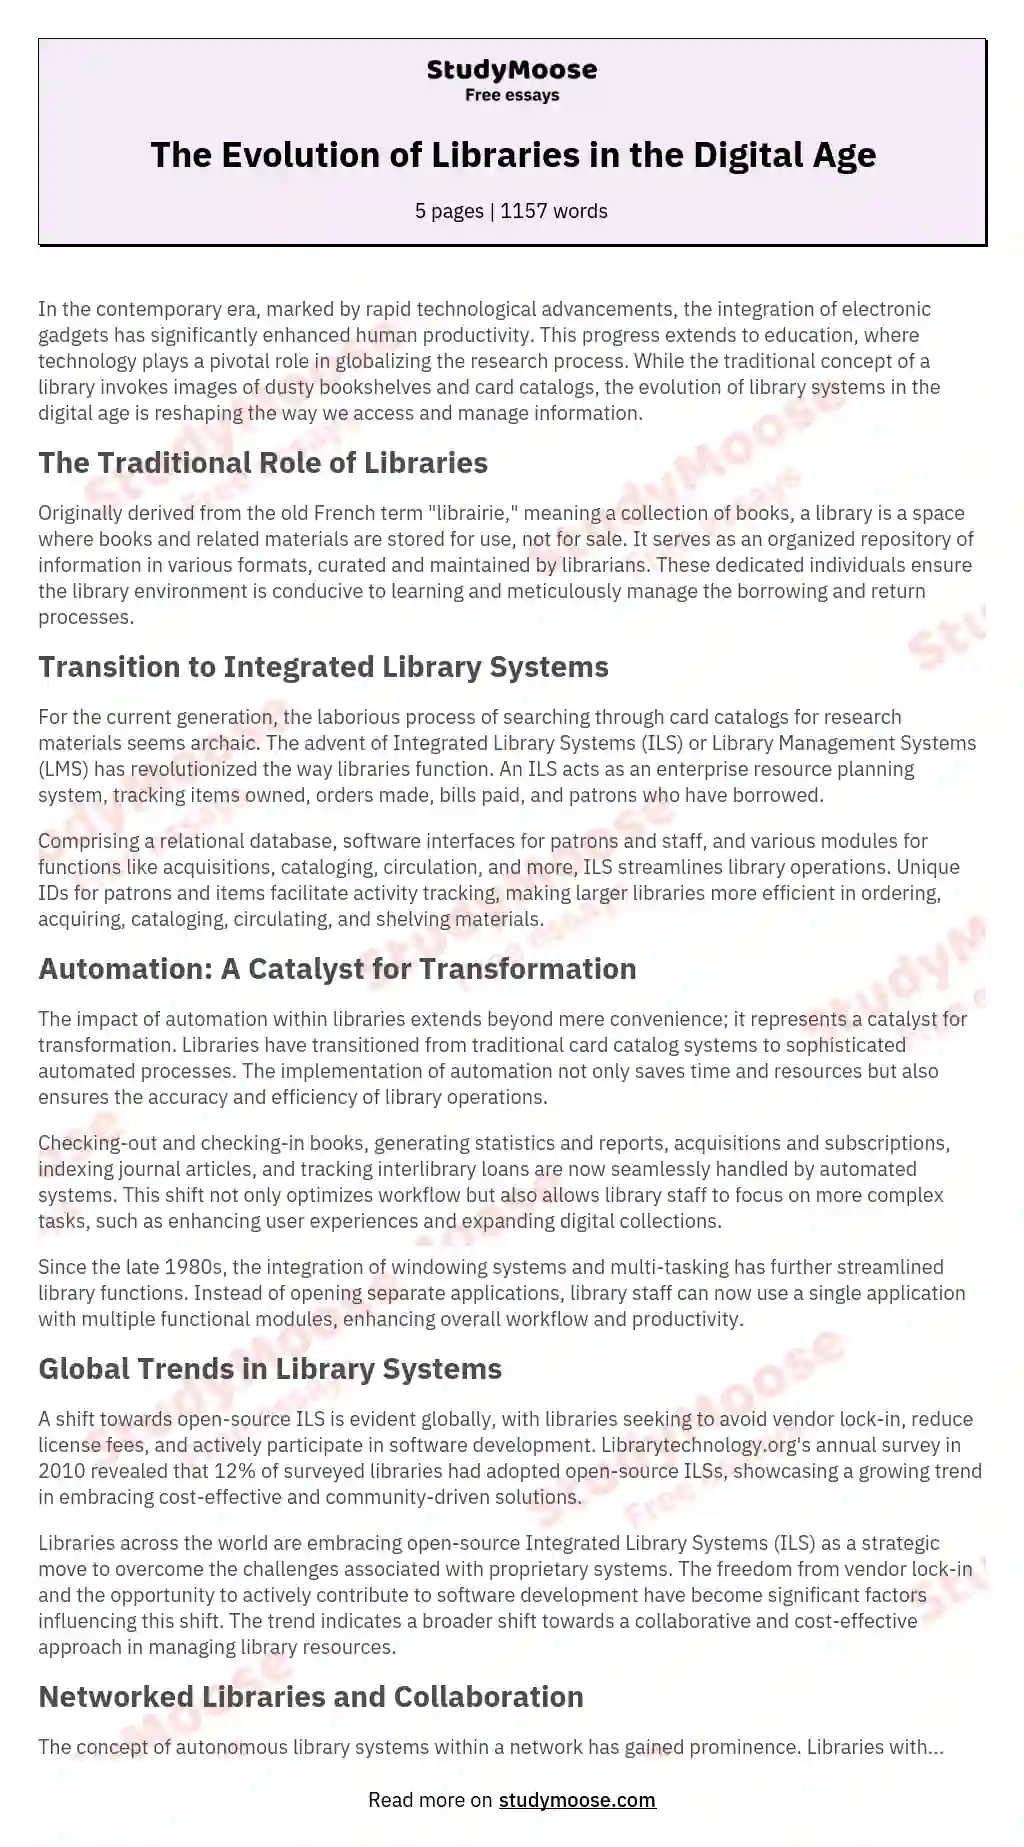 The Evolution of Libraries in the Digital Age essay